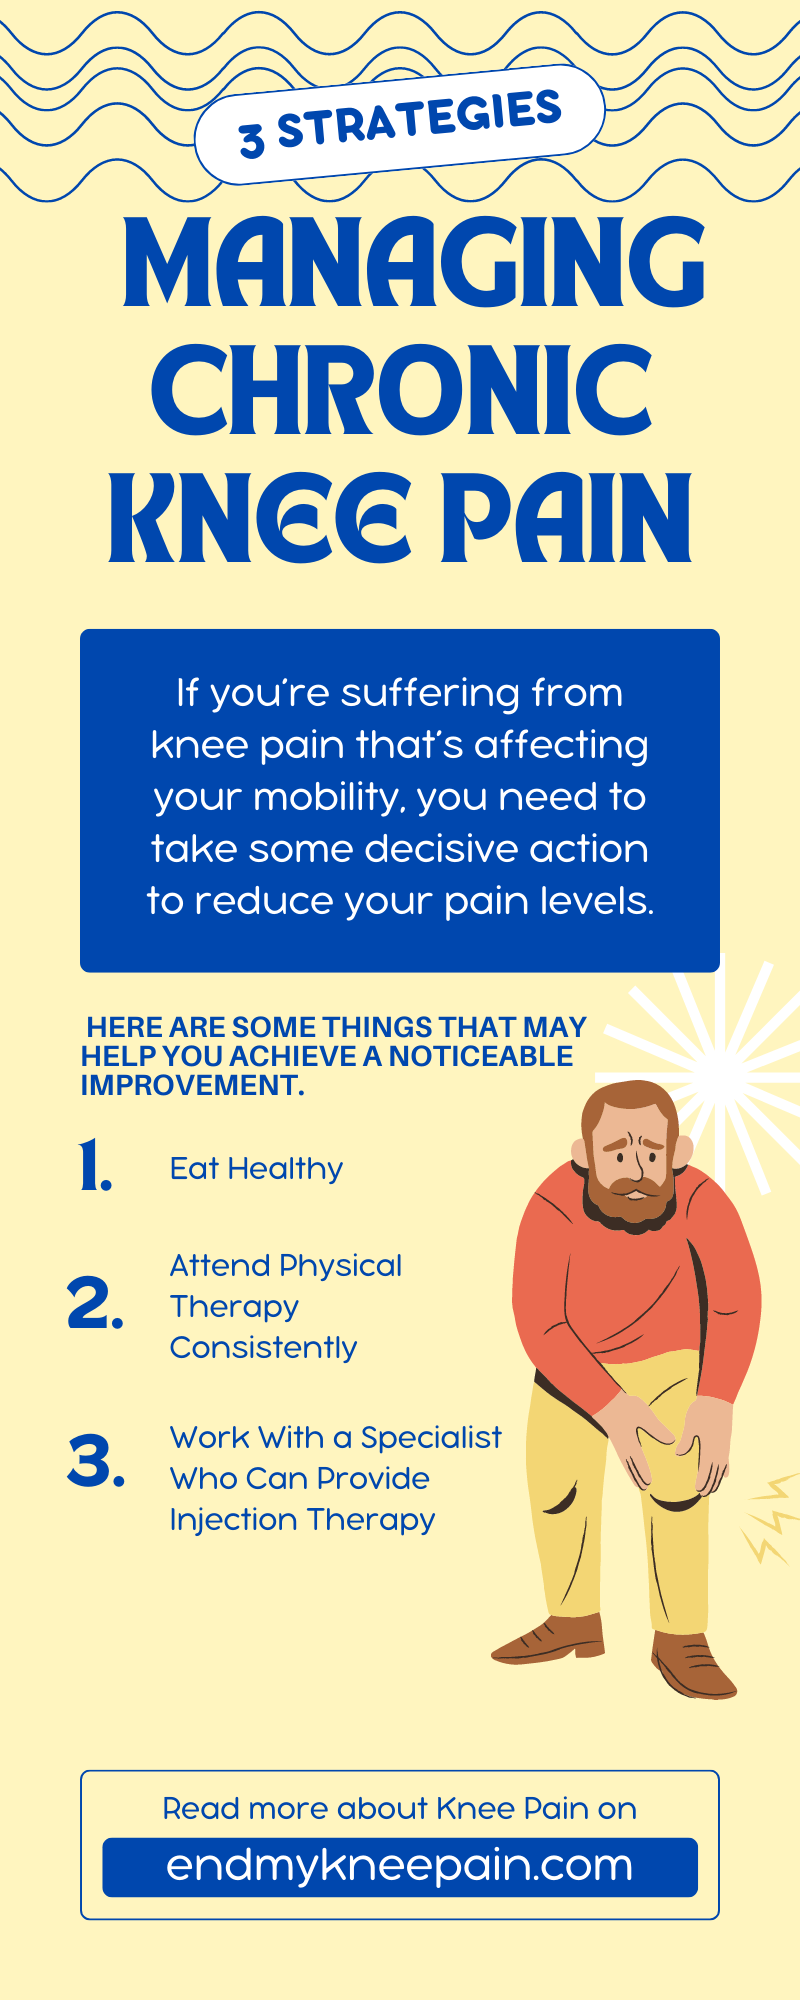 3 Strategies for Managing Chronic Knee Pain Infographic